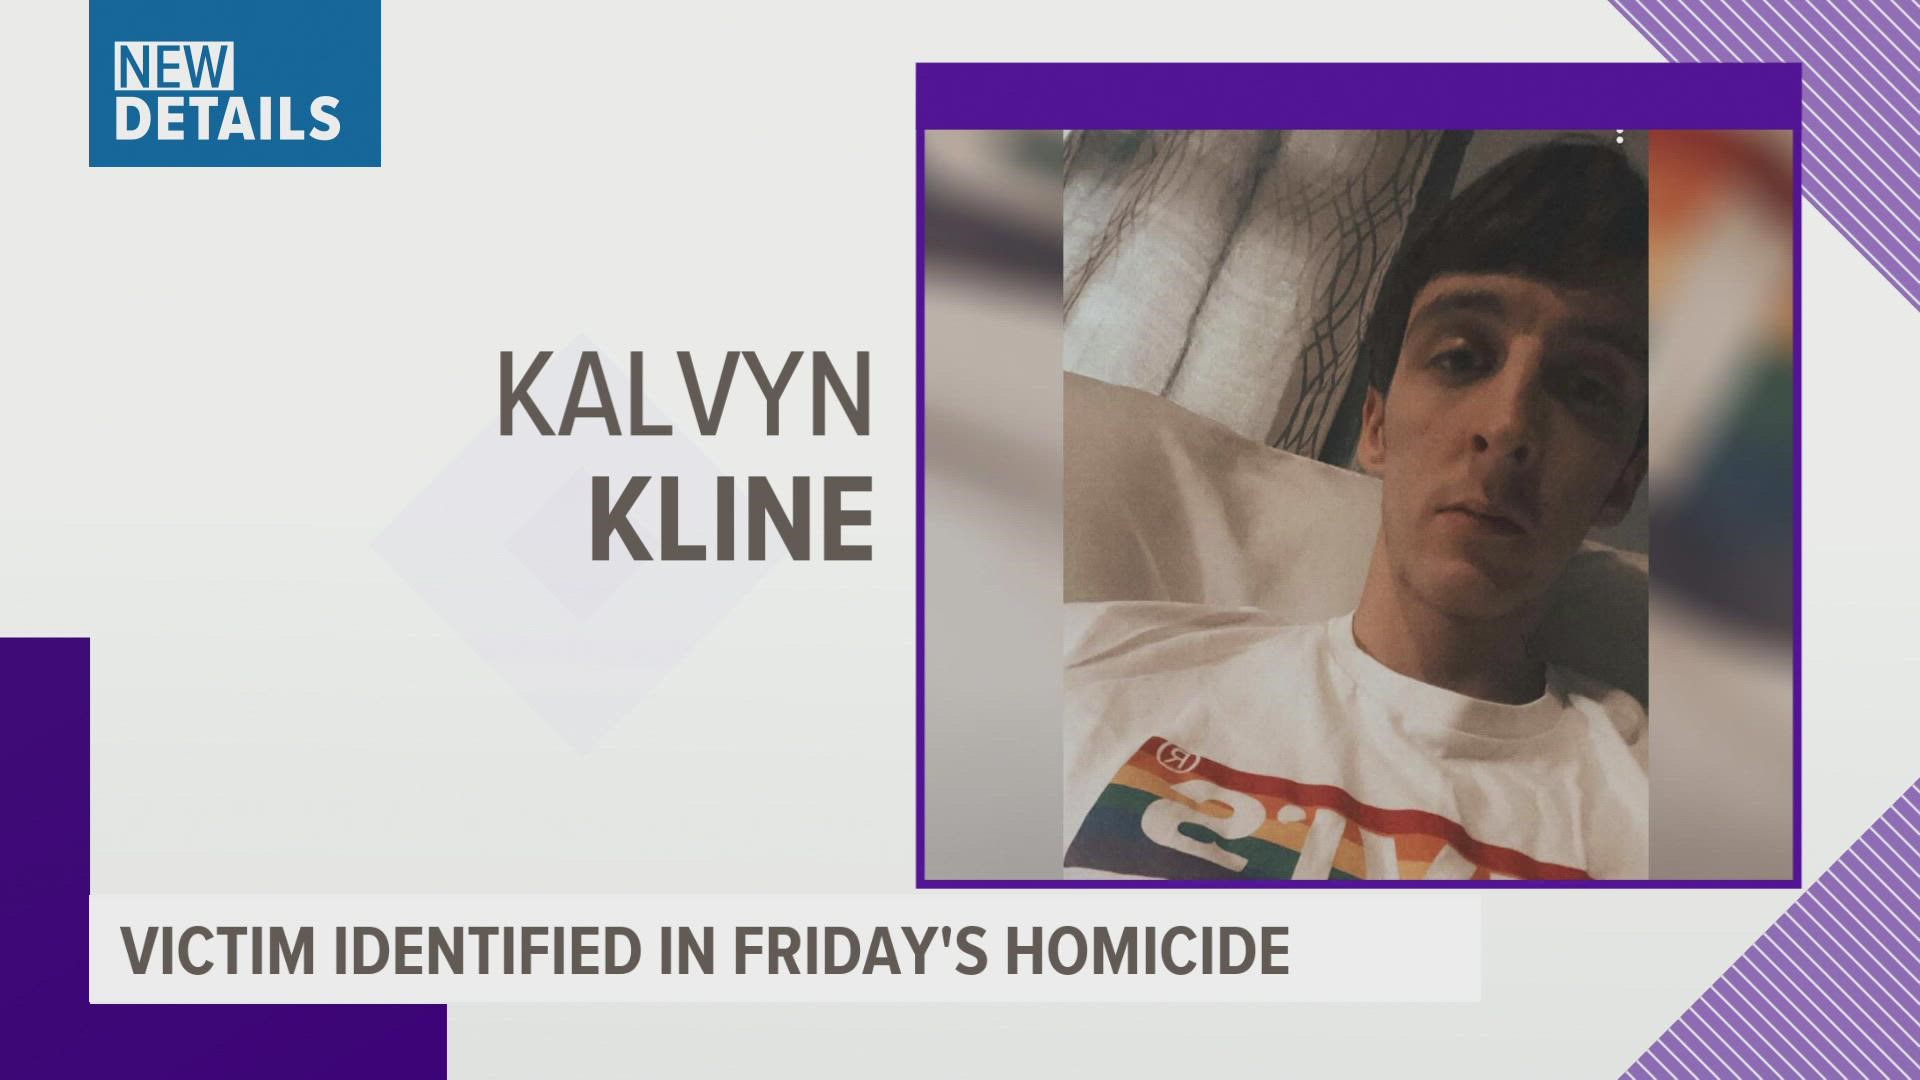 21-year-old Des Moines resident Kalvyn Roy Kline was killed in the city's ninth homicide of the year.